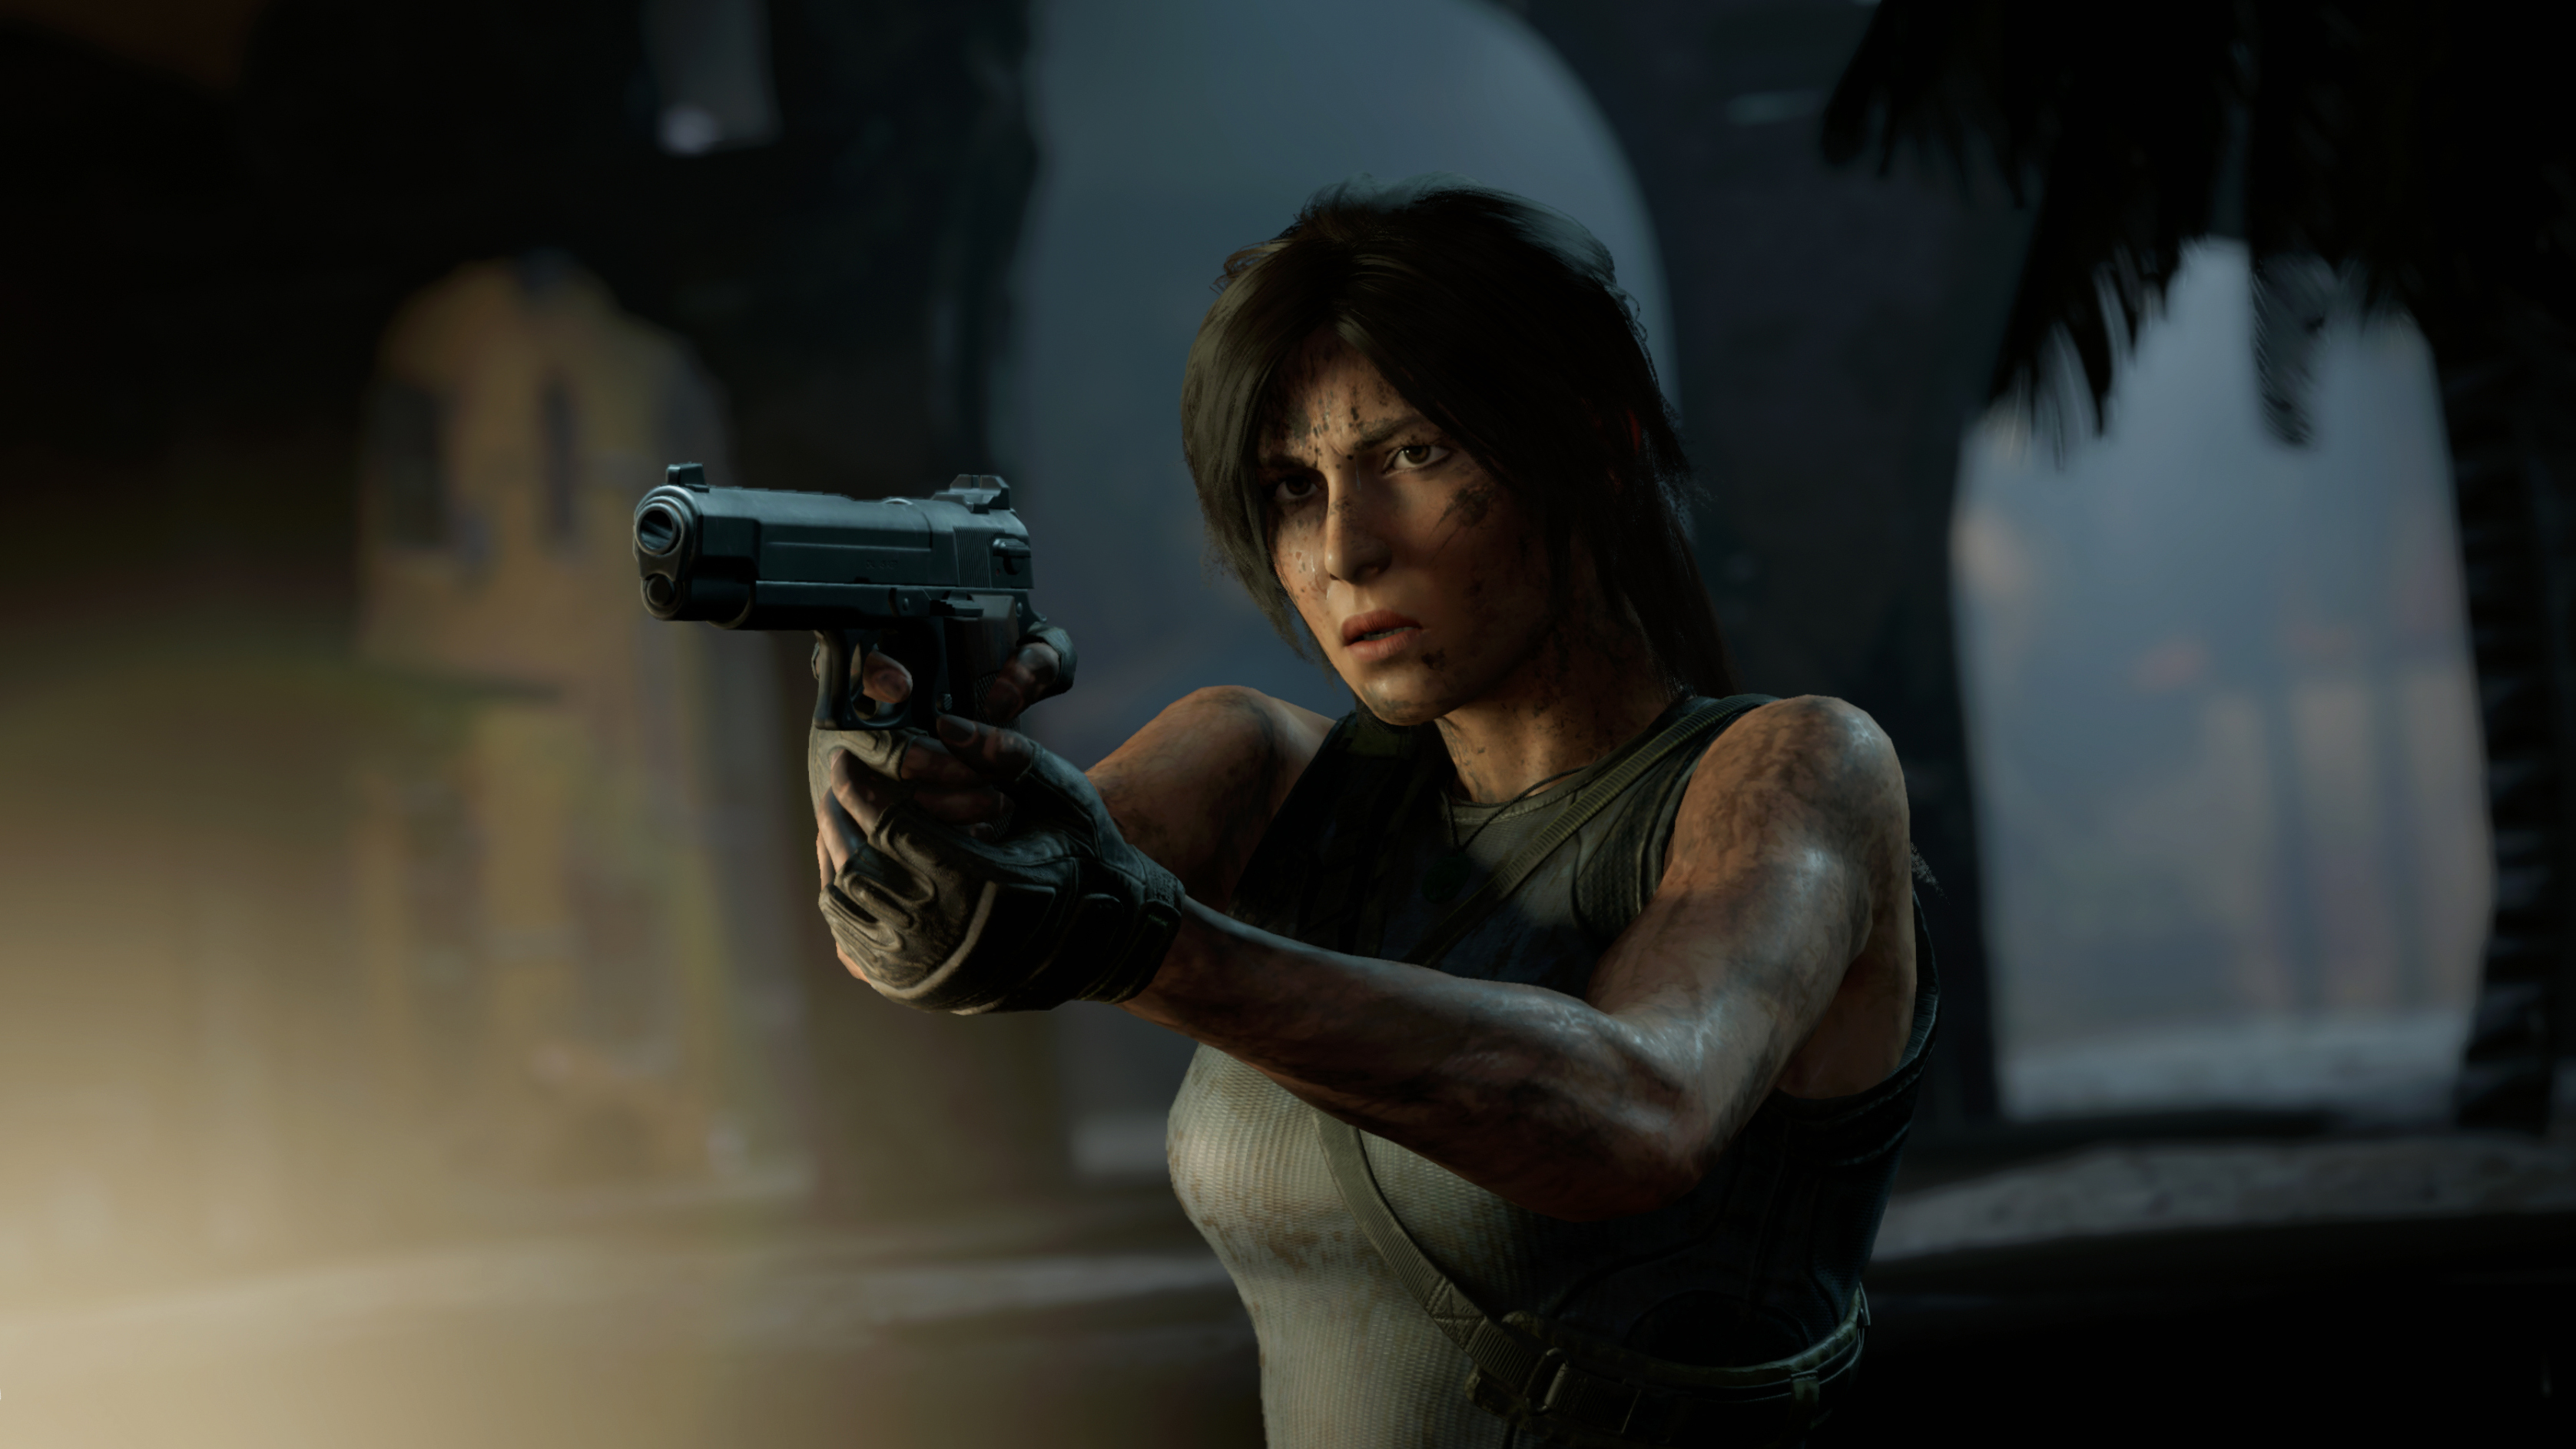 Rise of the Tomb Raider review: This is Lara's best adventure yet